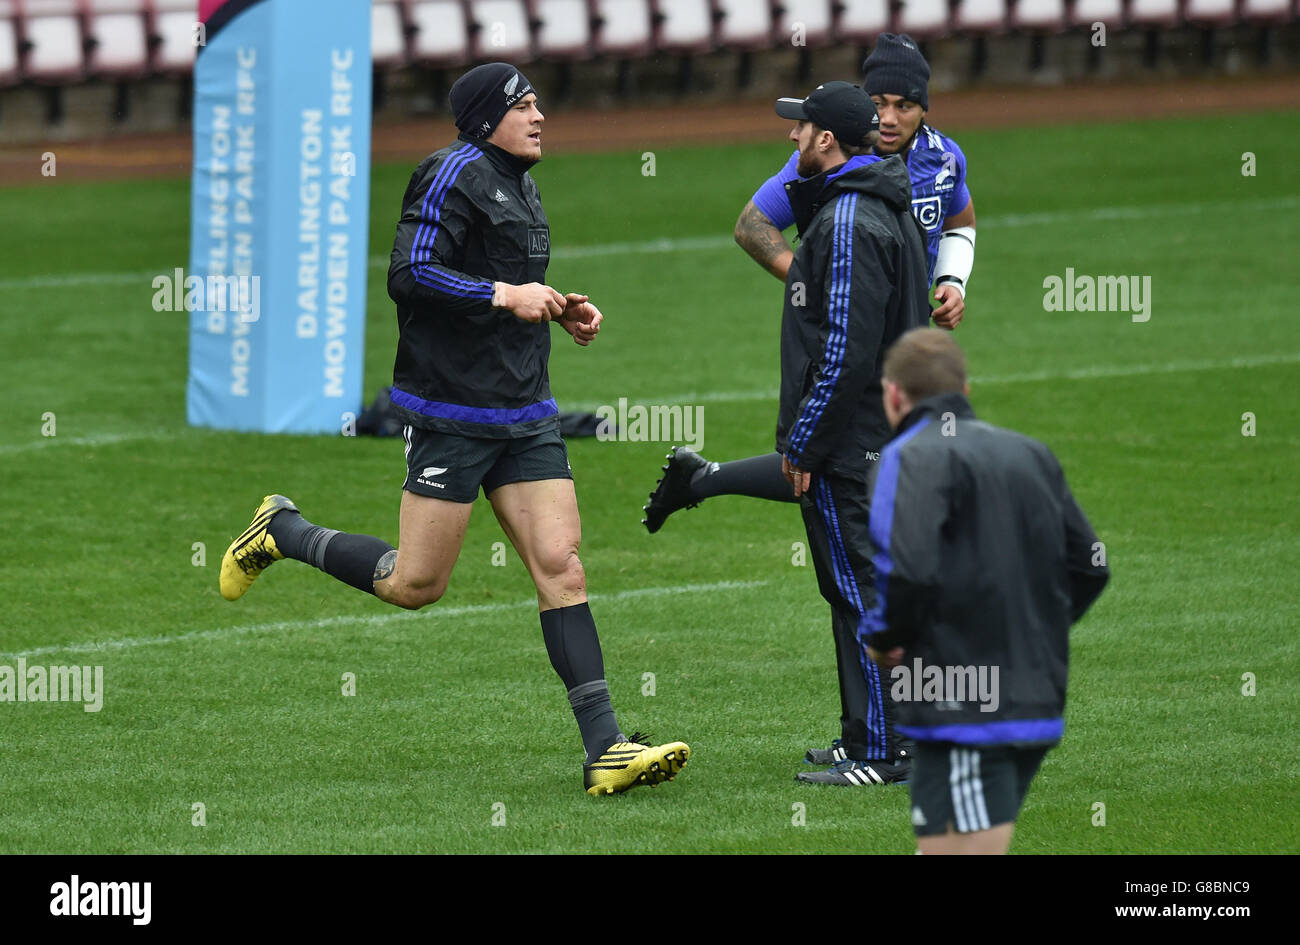 Rugby Union - World Cup 2015 - New Zealand Training Session - Darlington Mowden Park Stock Photo